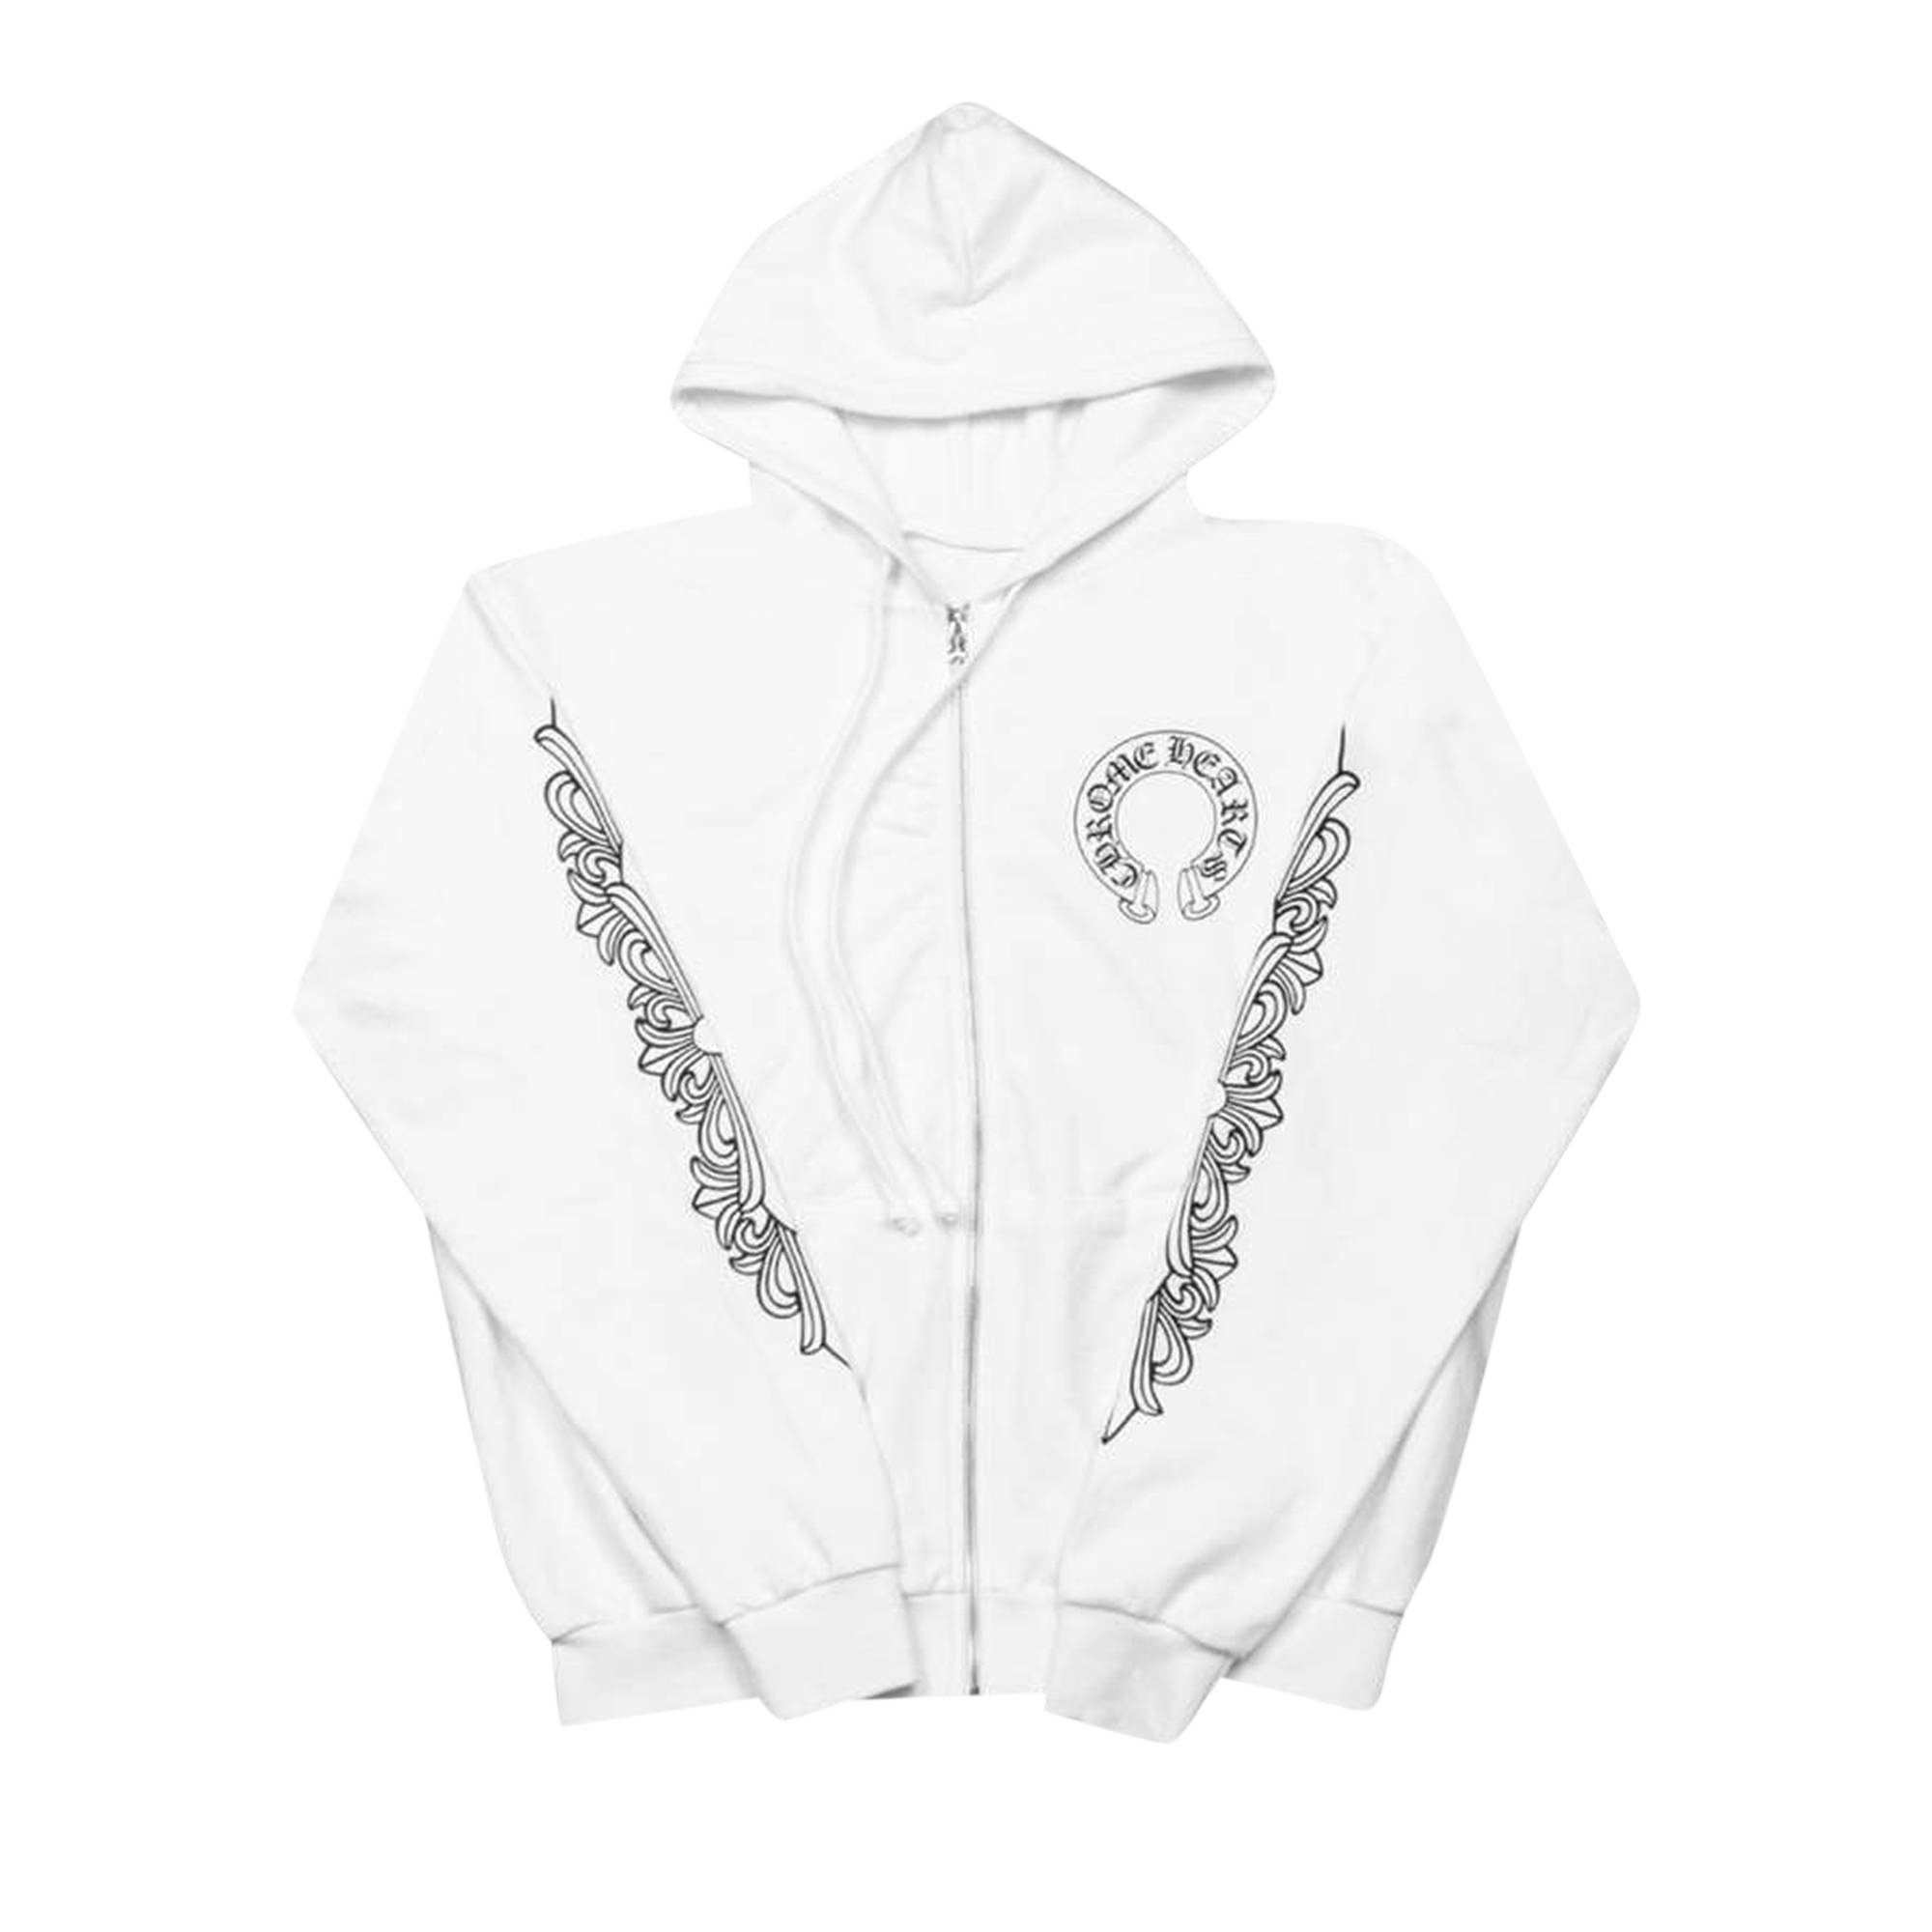 Chrome Hearts Floral Cross Zip Hoodie 'White' - 1